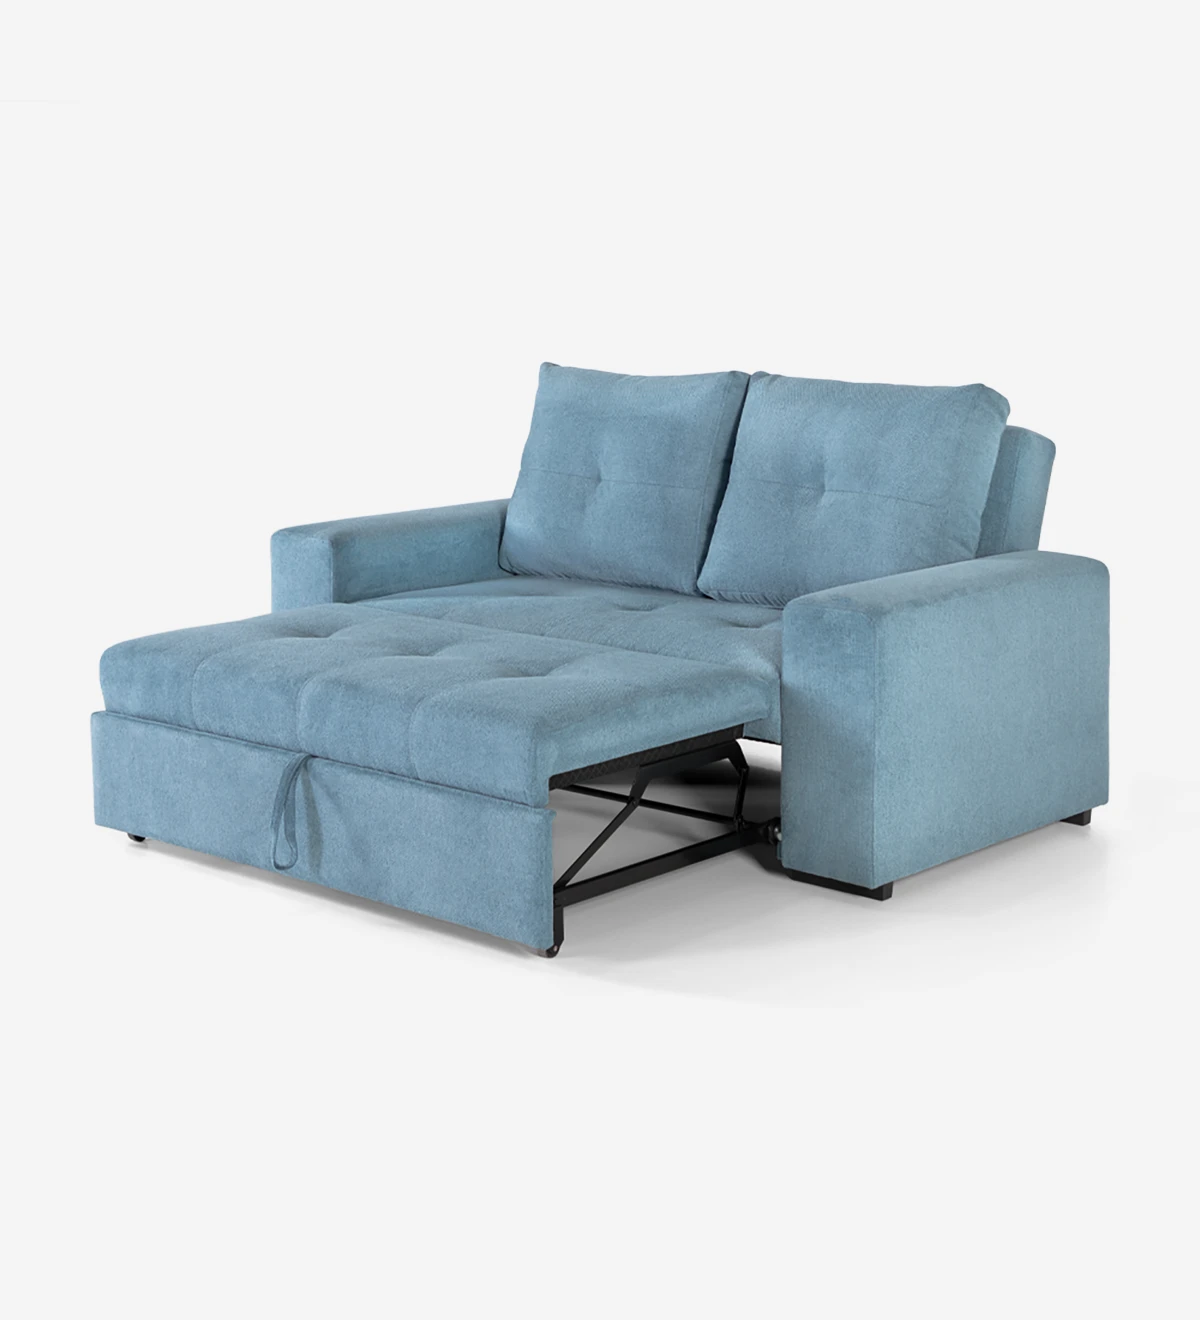 2 seater with bed, fabric upholstered, with removable backrest cushions.